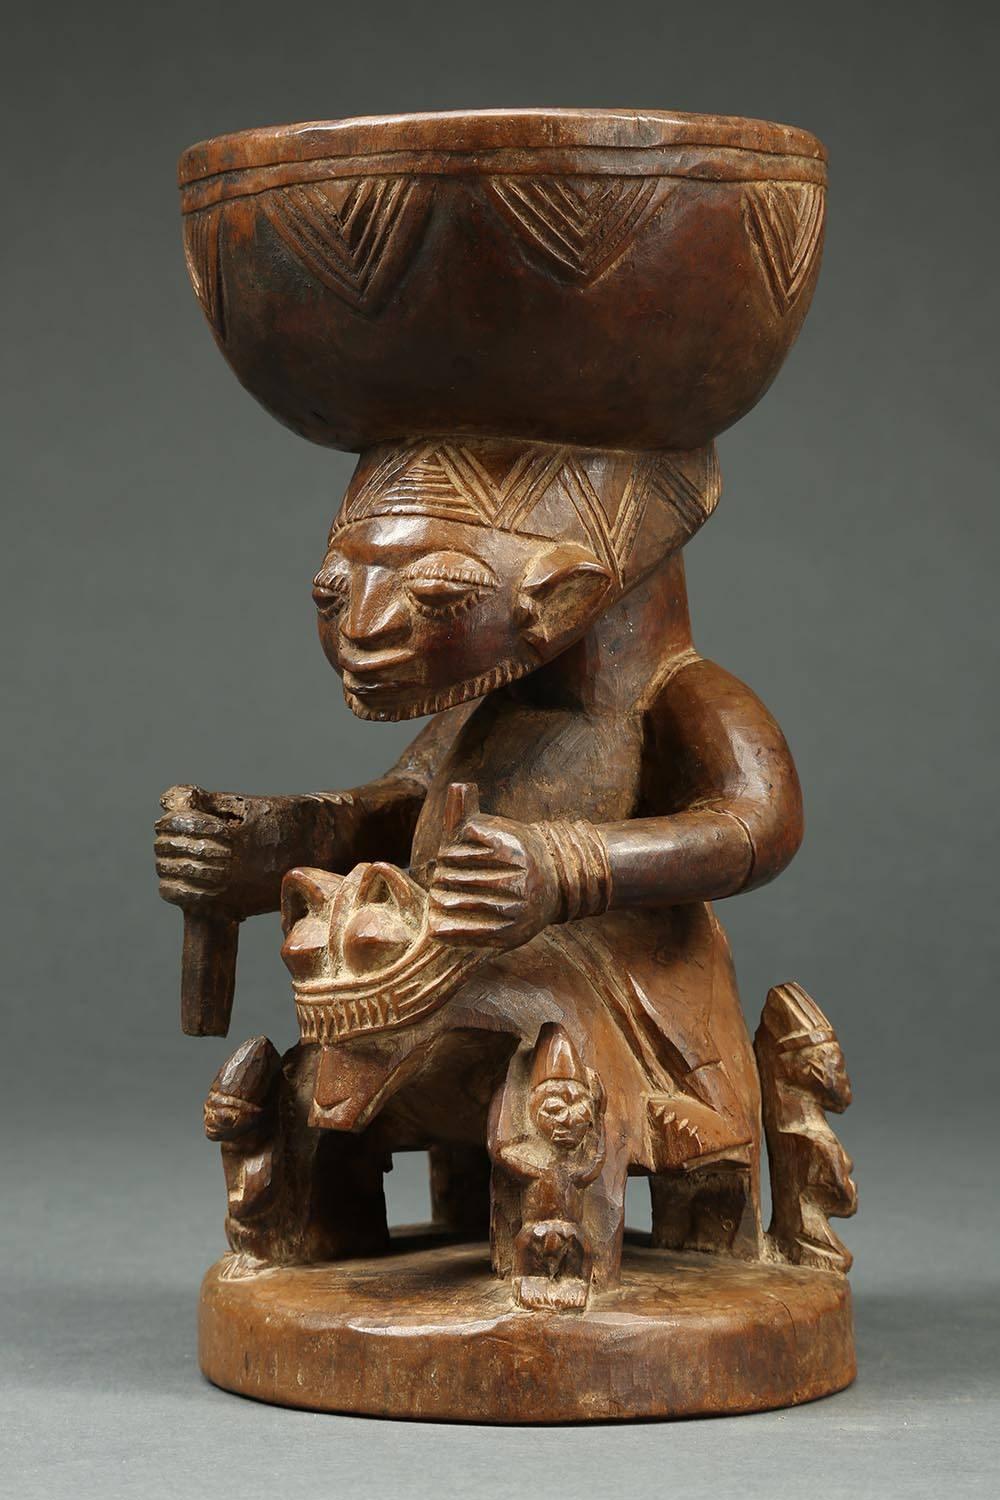 Hand-Carved Yoruba Tribal Offering Bowl with Horse and Rider, Nigeria